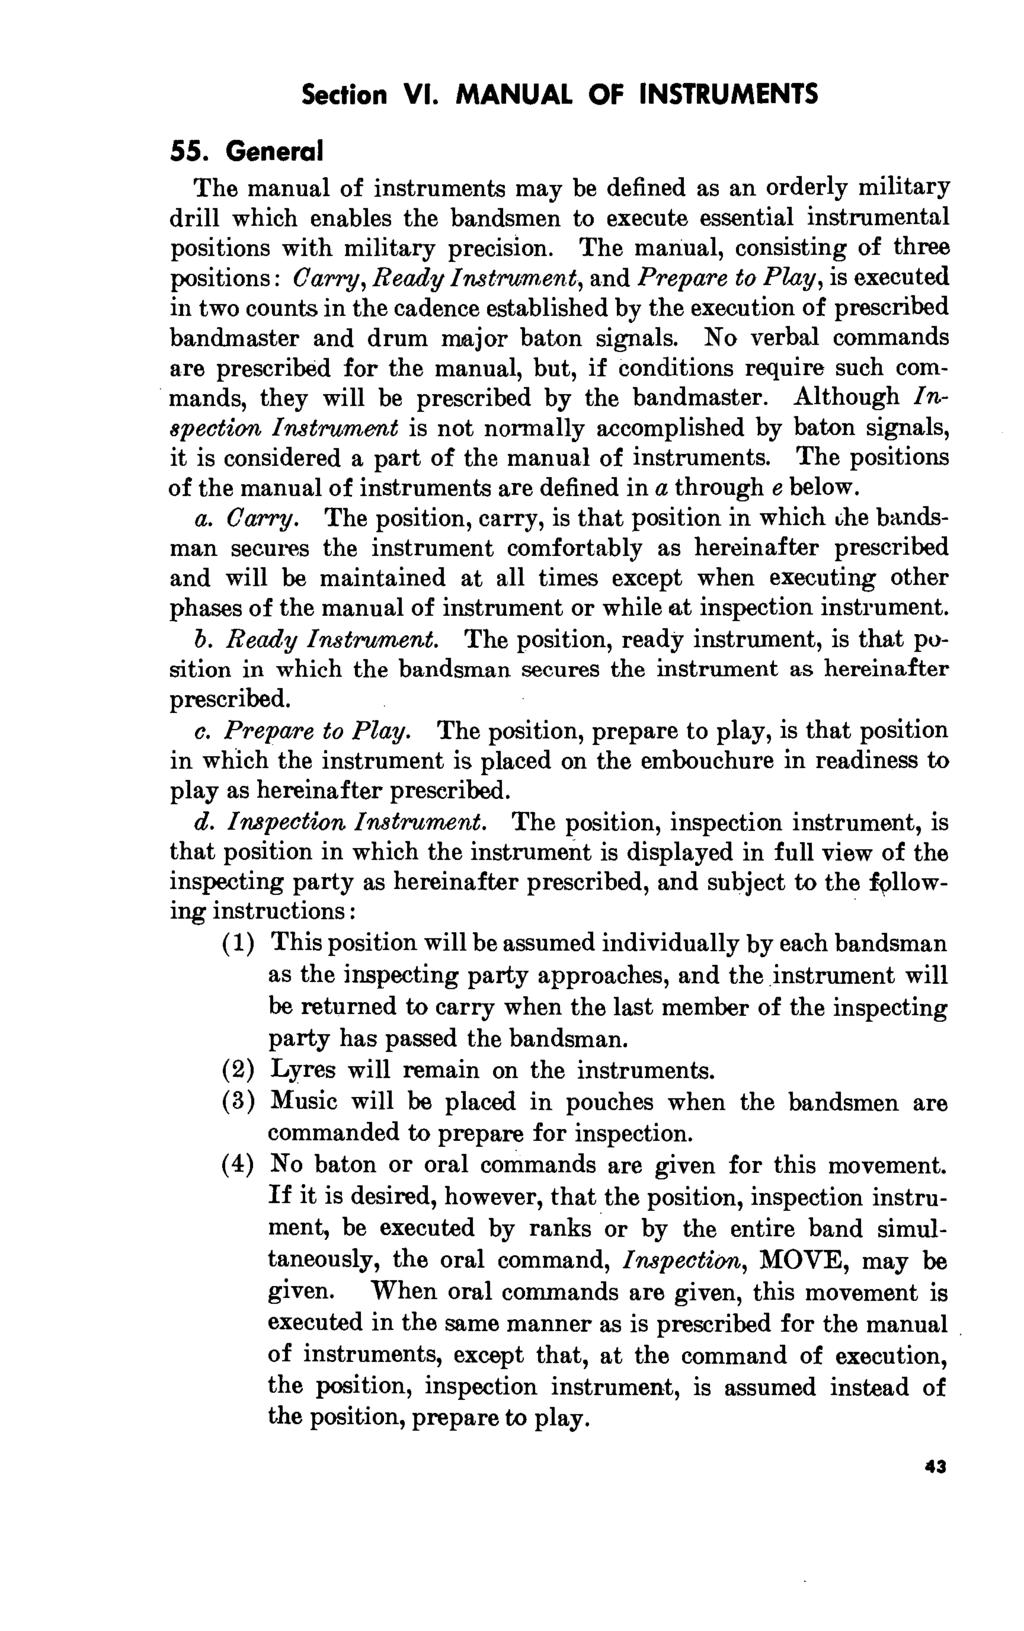 Section VI. MANUAL OF INSTRUMENTS 55.